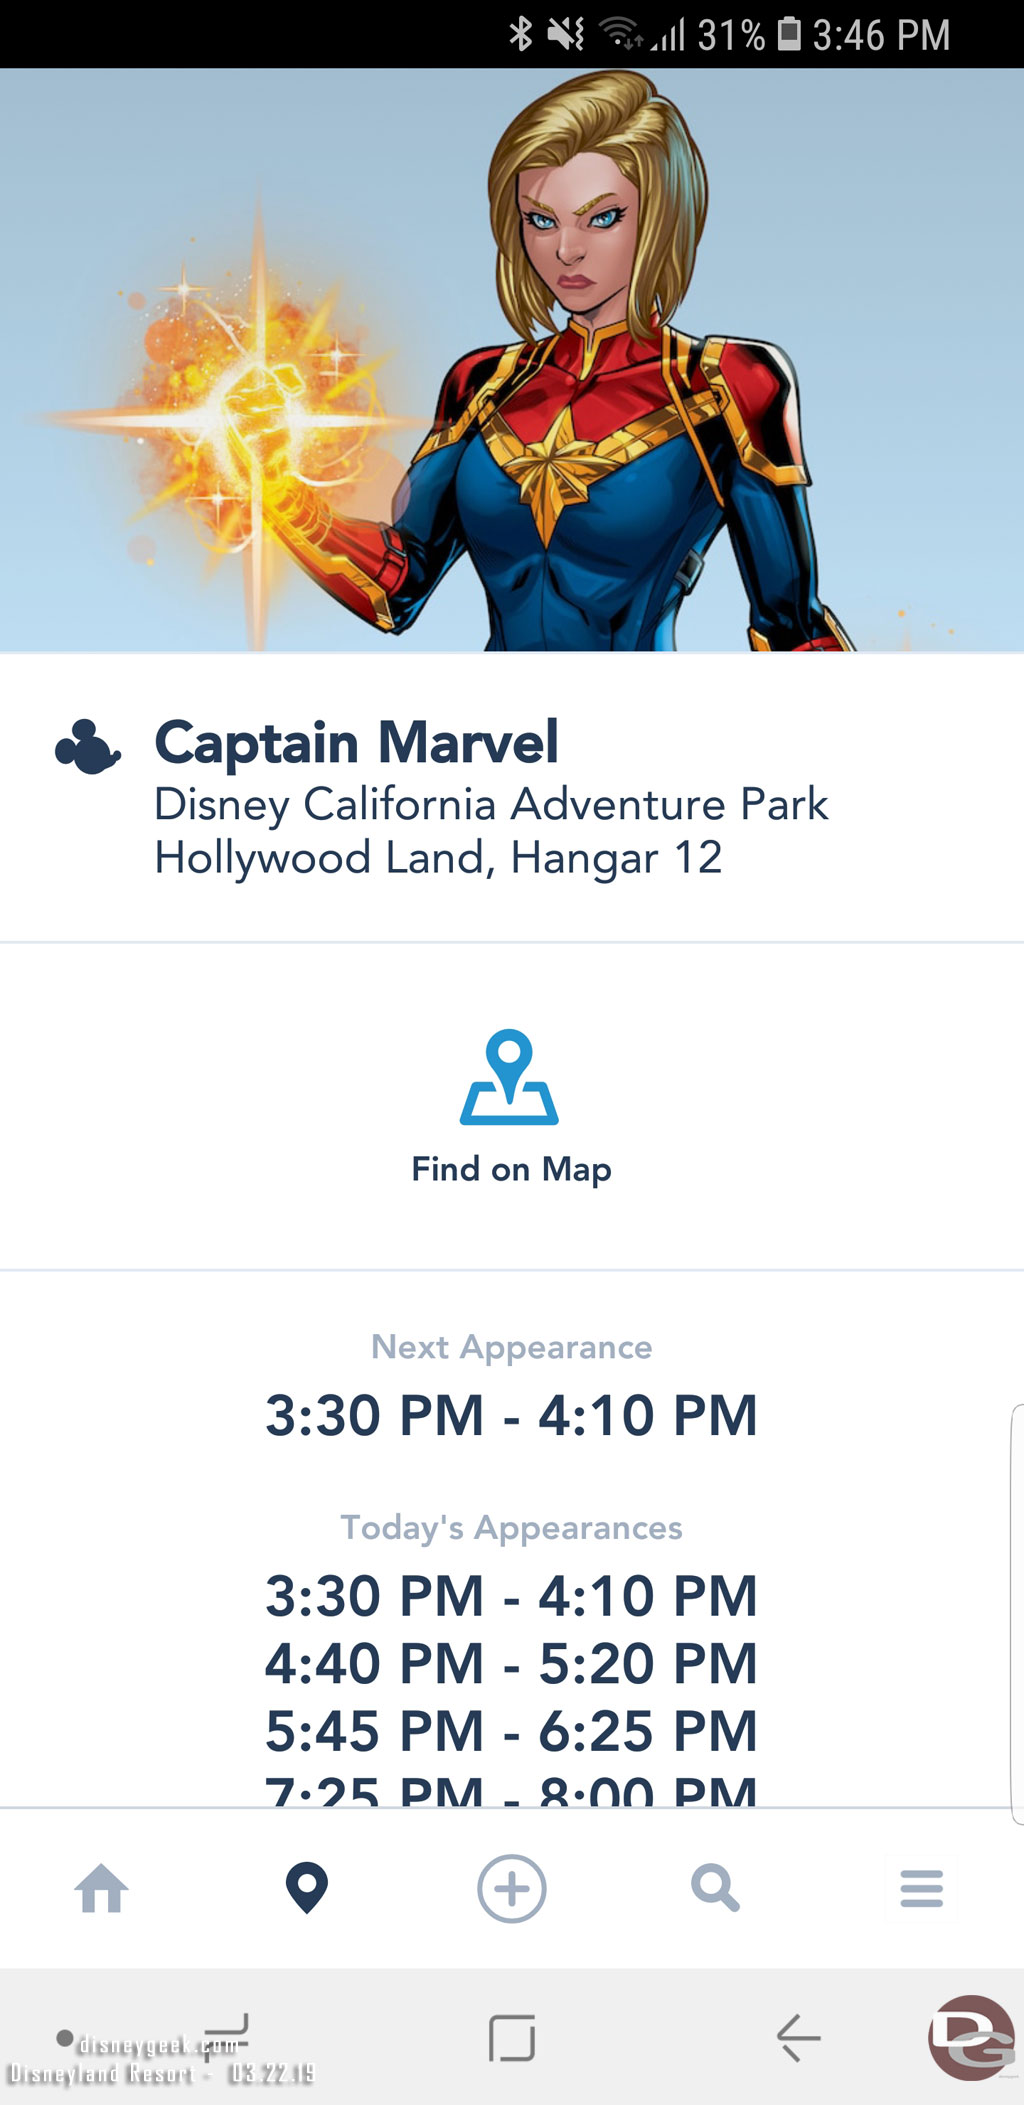 Captian Marvel Meet and Greeet in Hollywood Land at Disney California Adventure